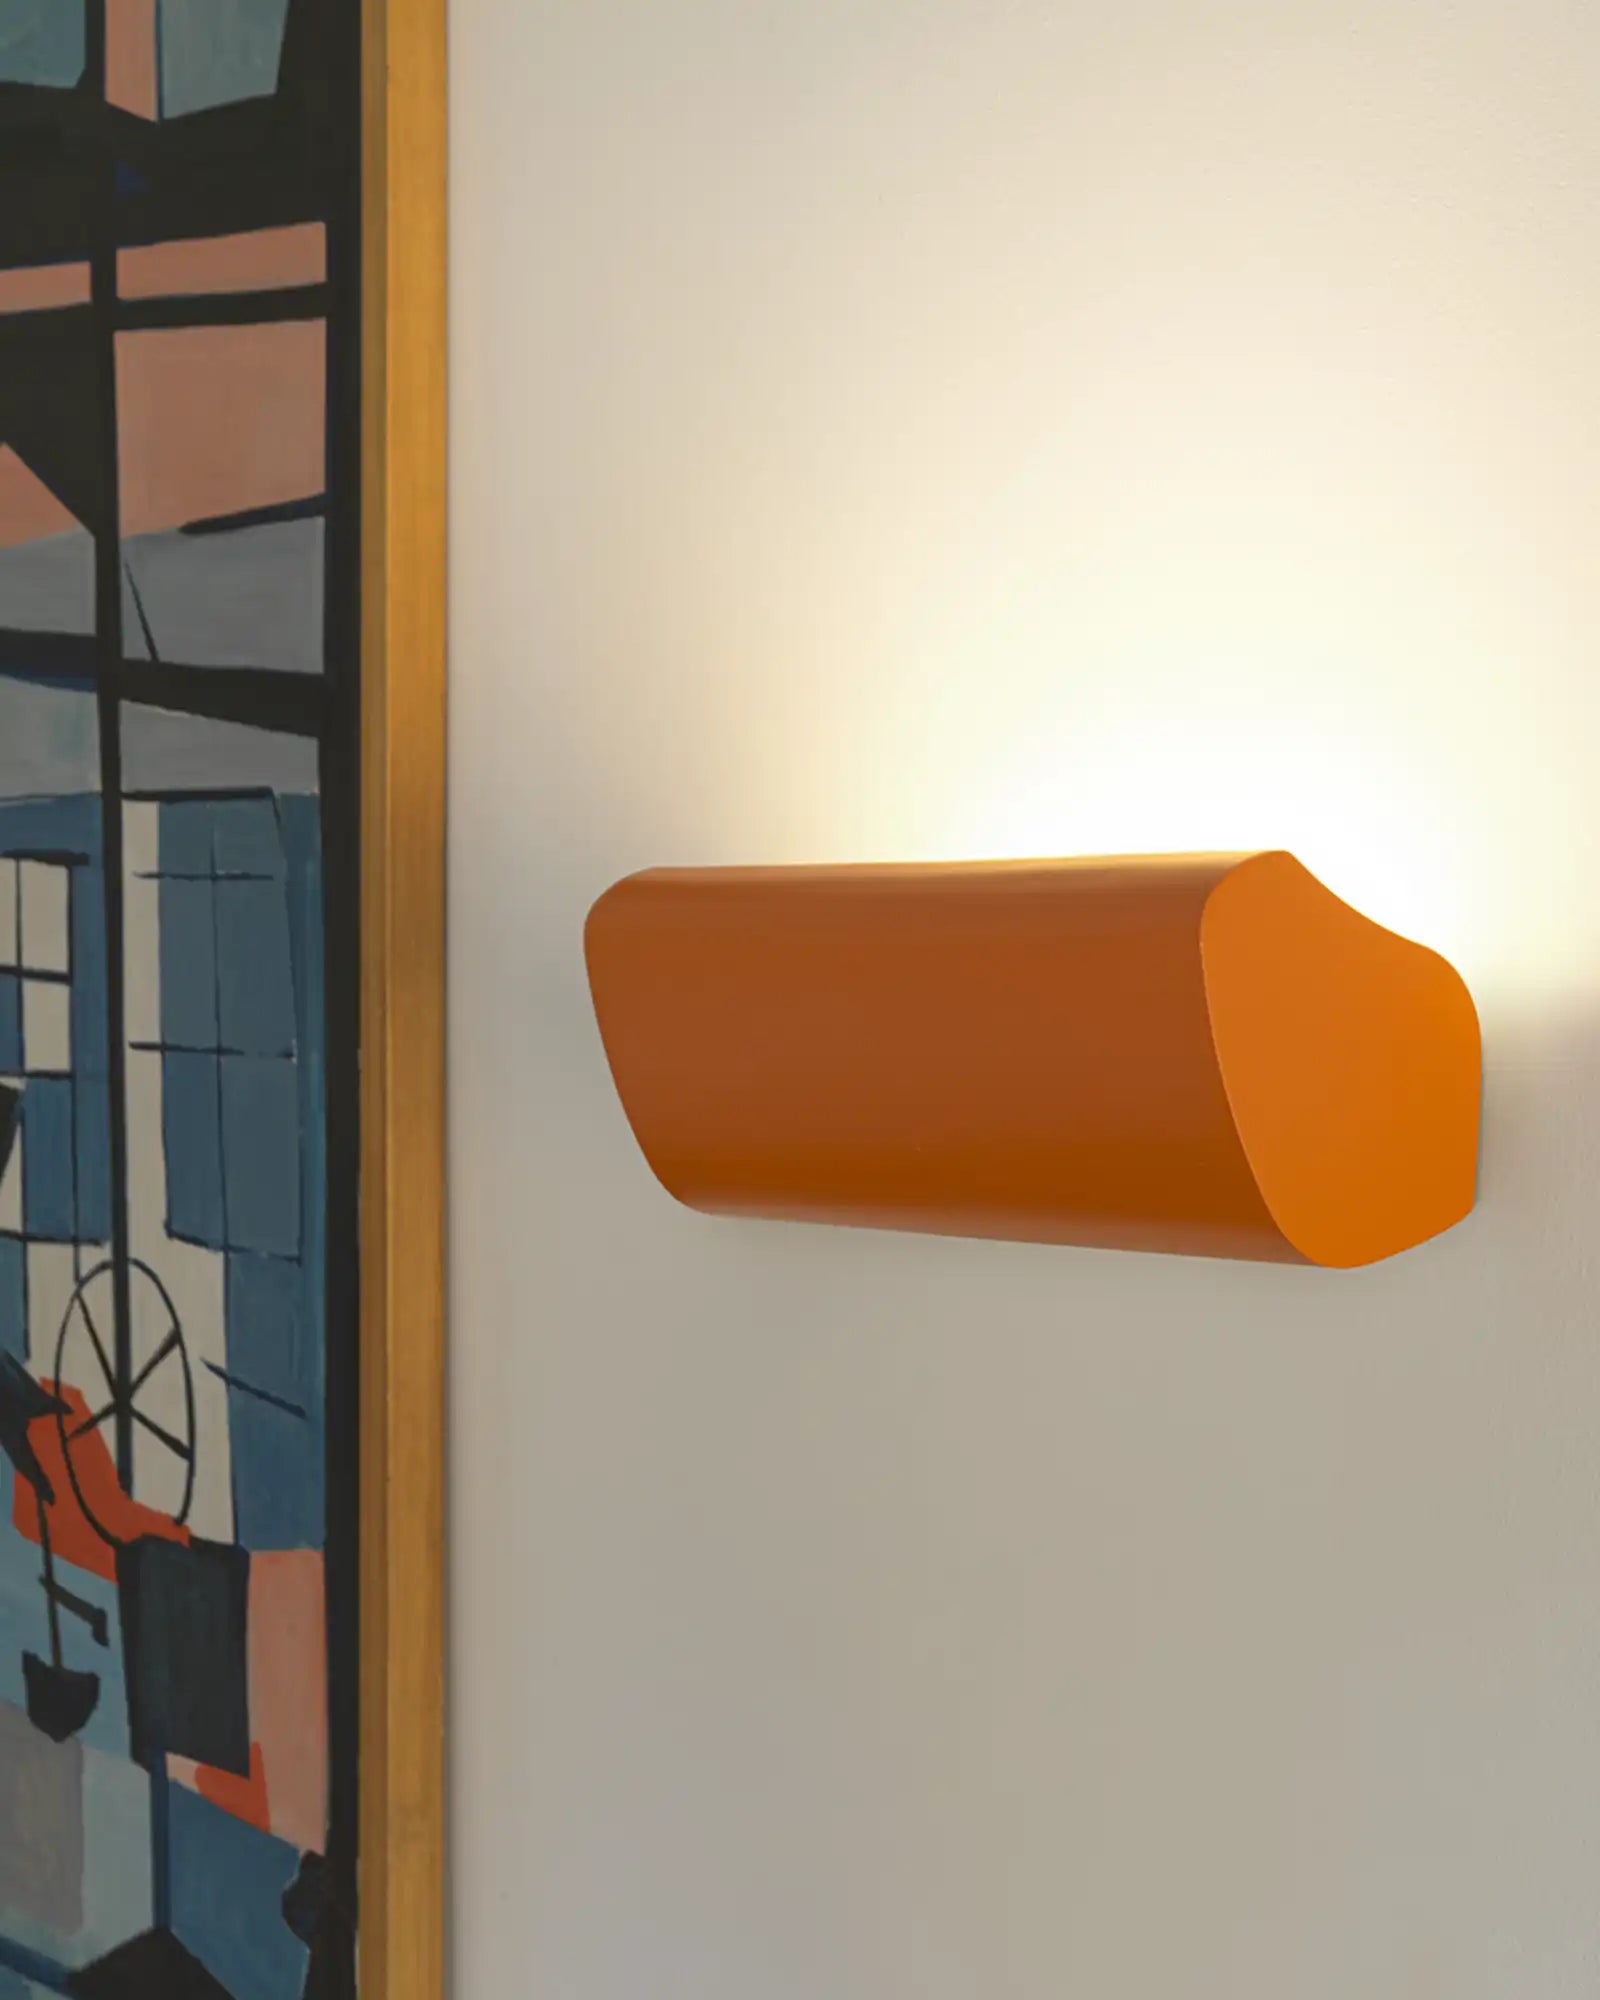 Applique Radieuse Wall Light by Nemo Lighting featured within a contemporary living room | Nook Collections